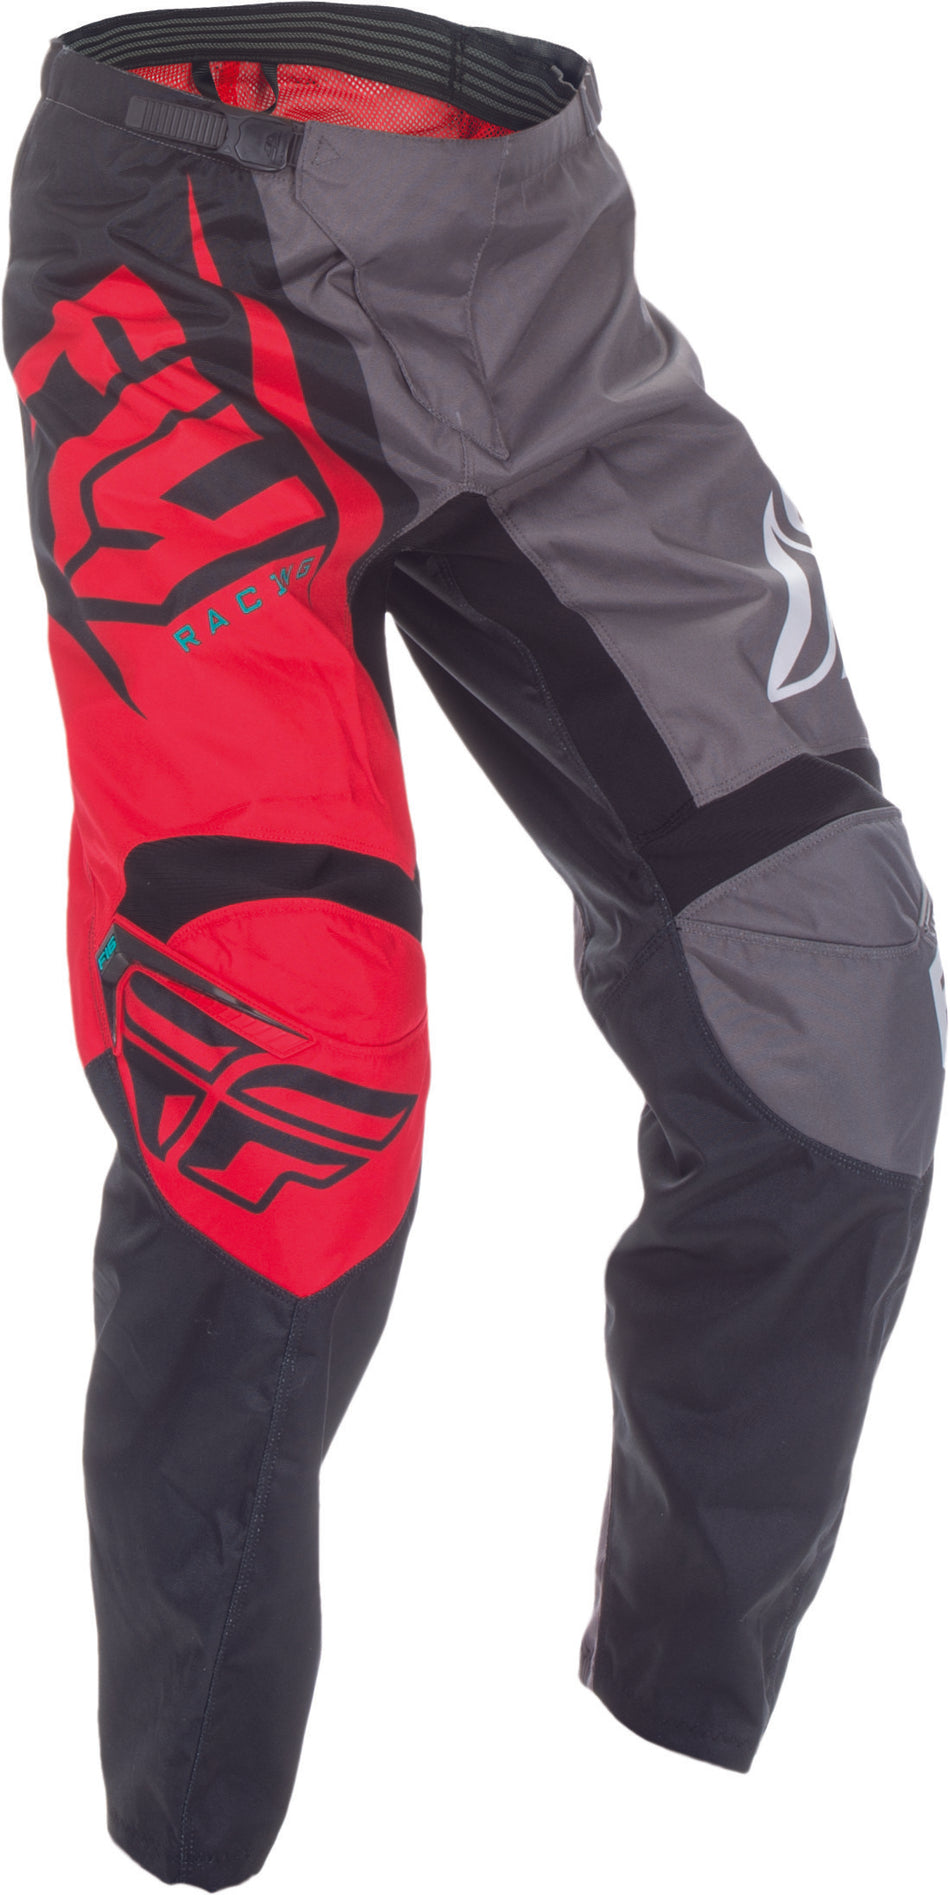 FLY RACING F-16 Pant Red/Black/Grey Sz 32 370-93232